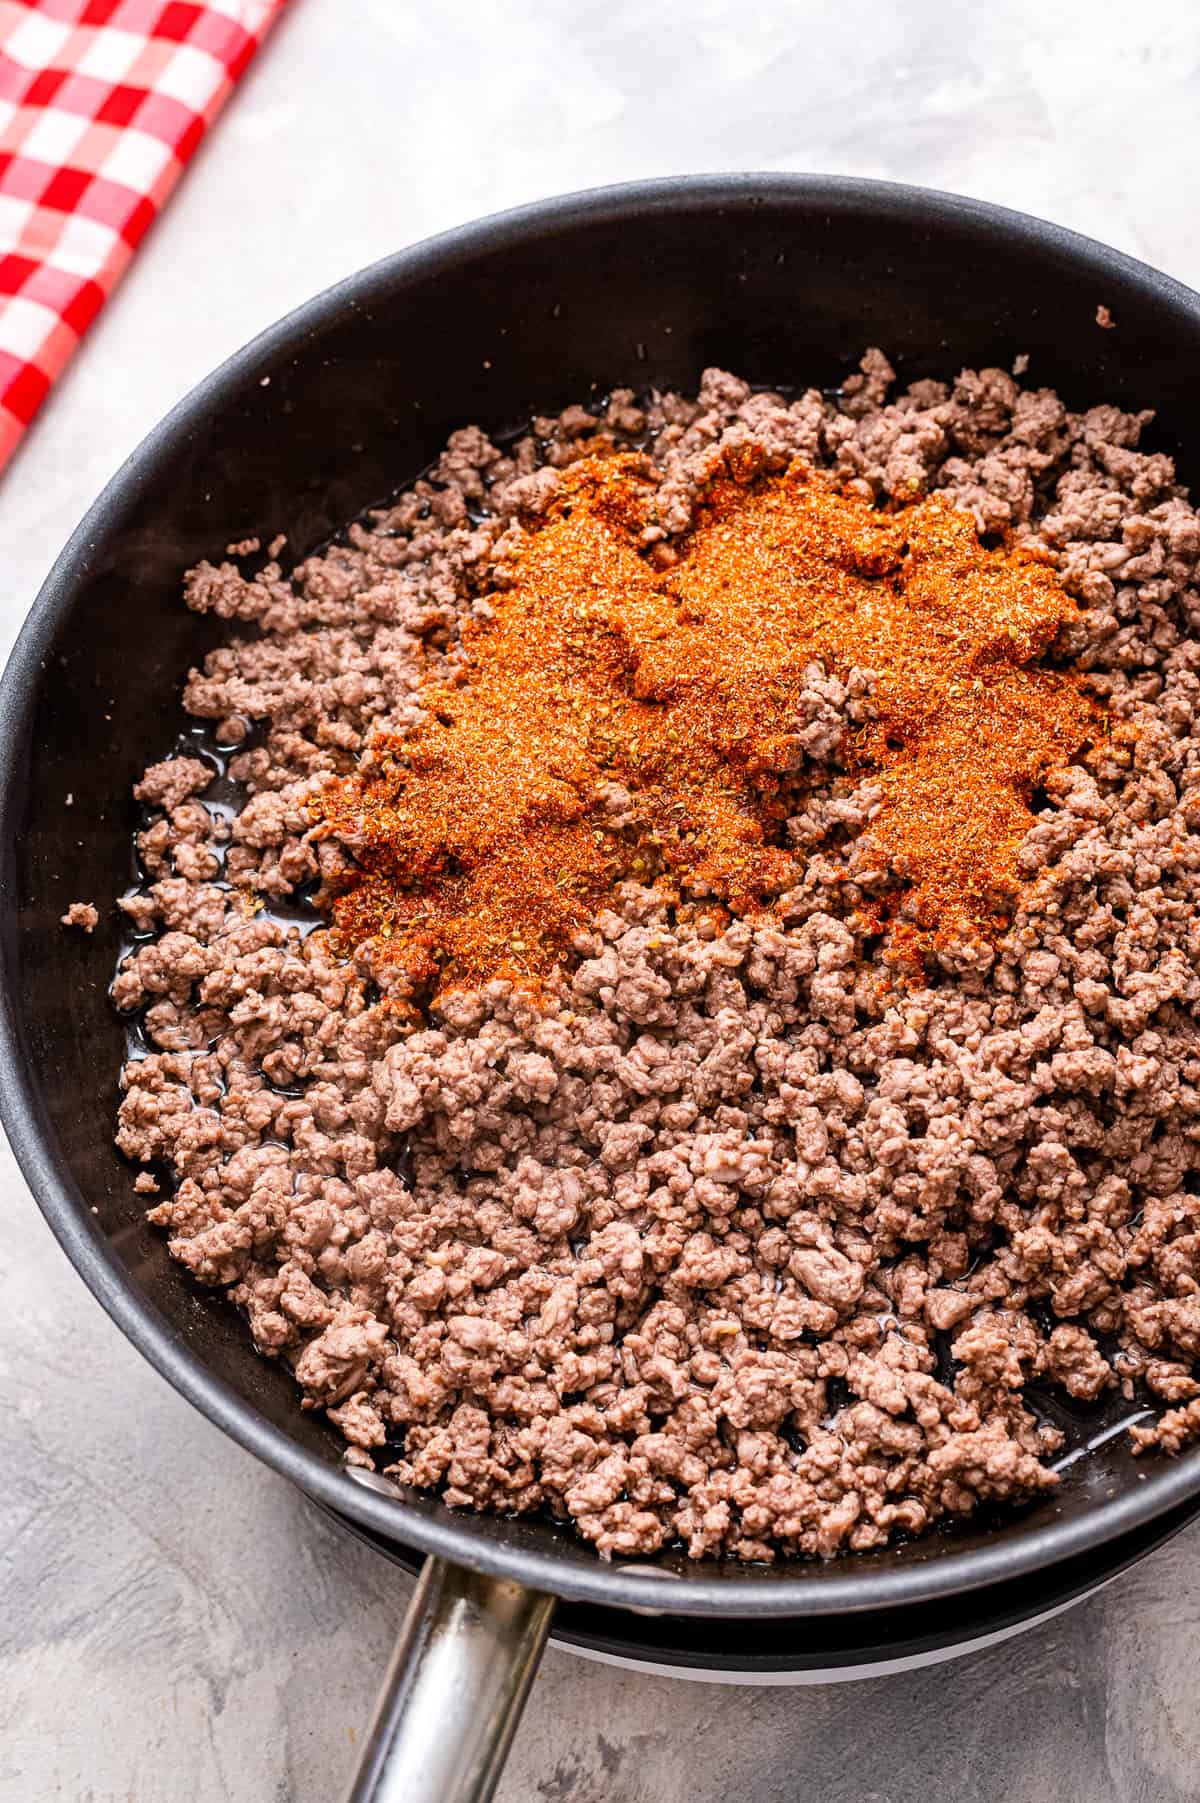 Skillet with ground beef and taco seasoning on top